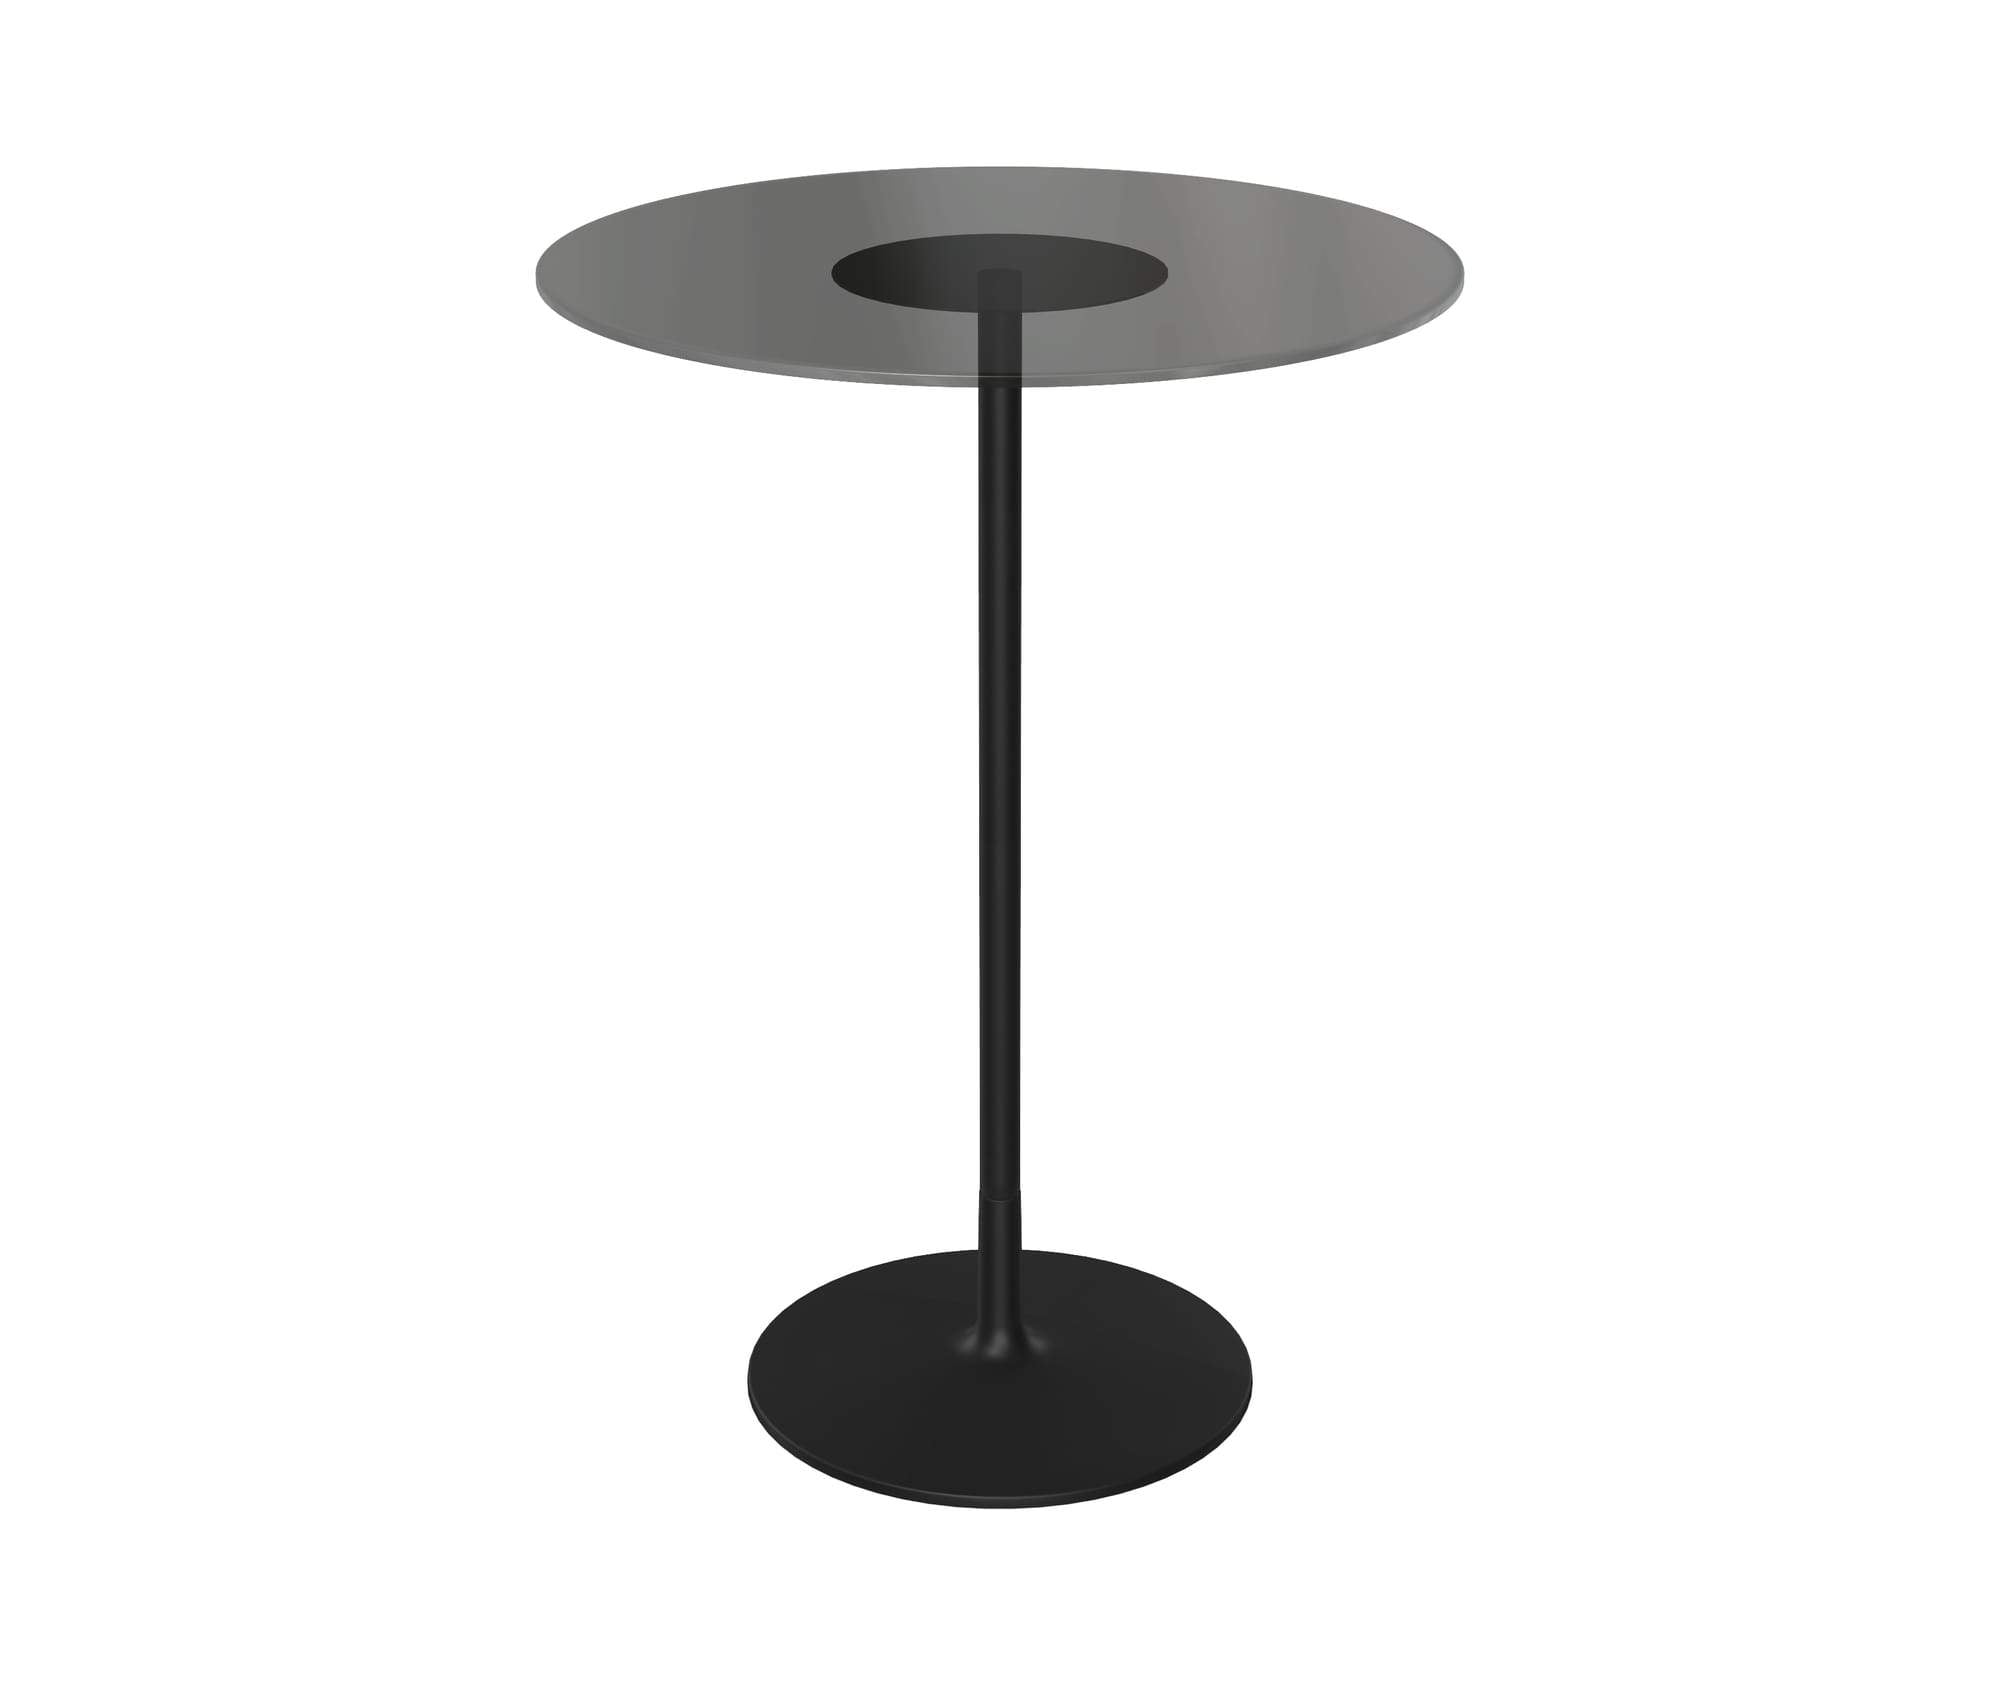 Chic Round Restaurant Table RR10 1100 mm High